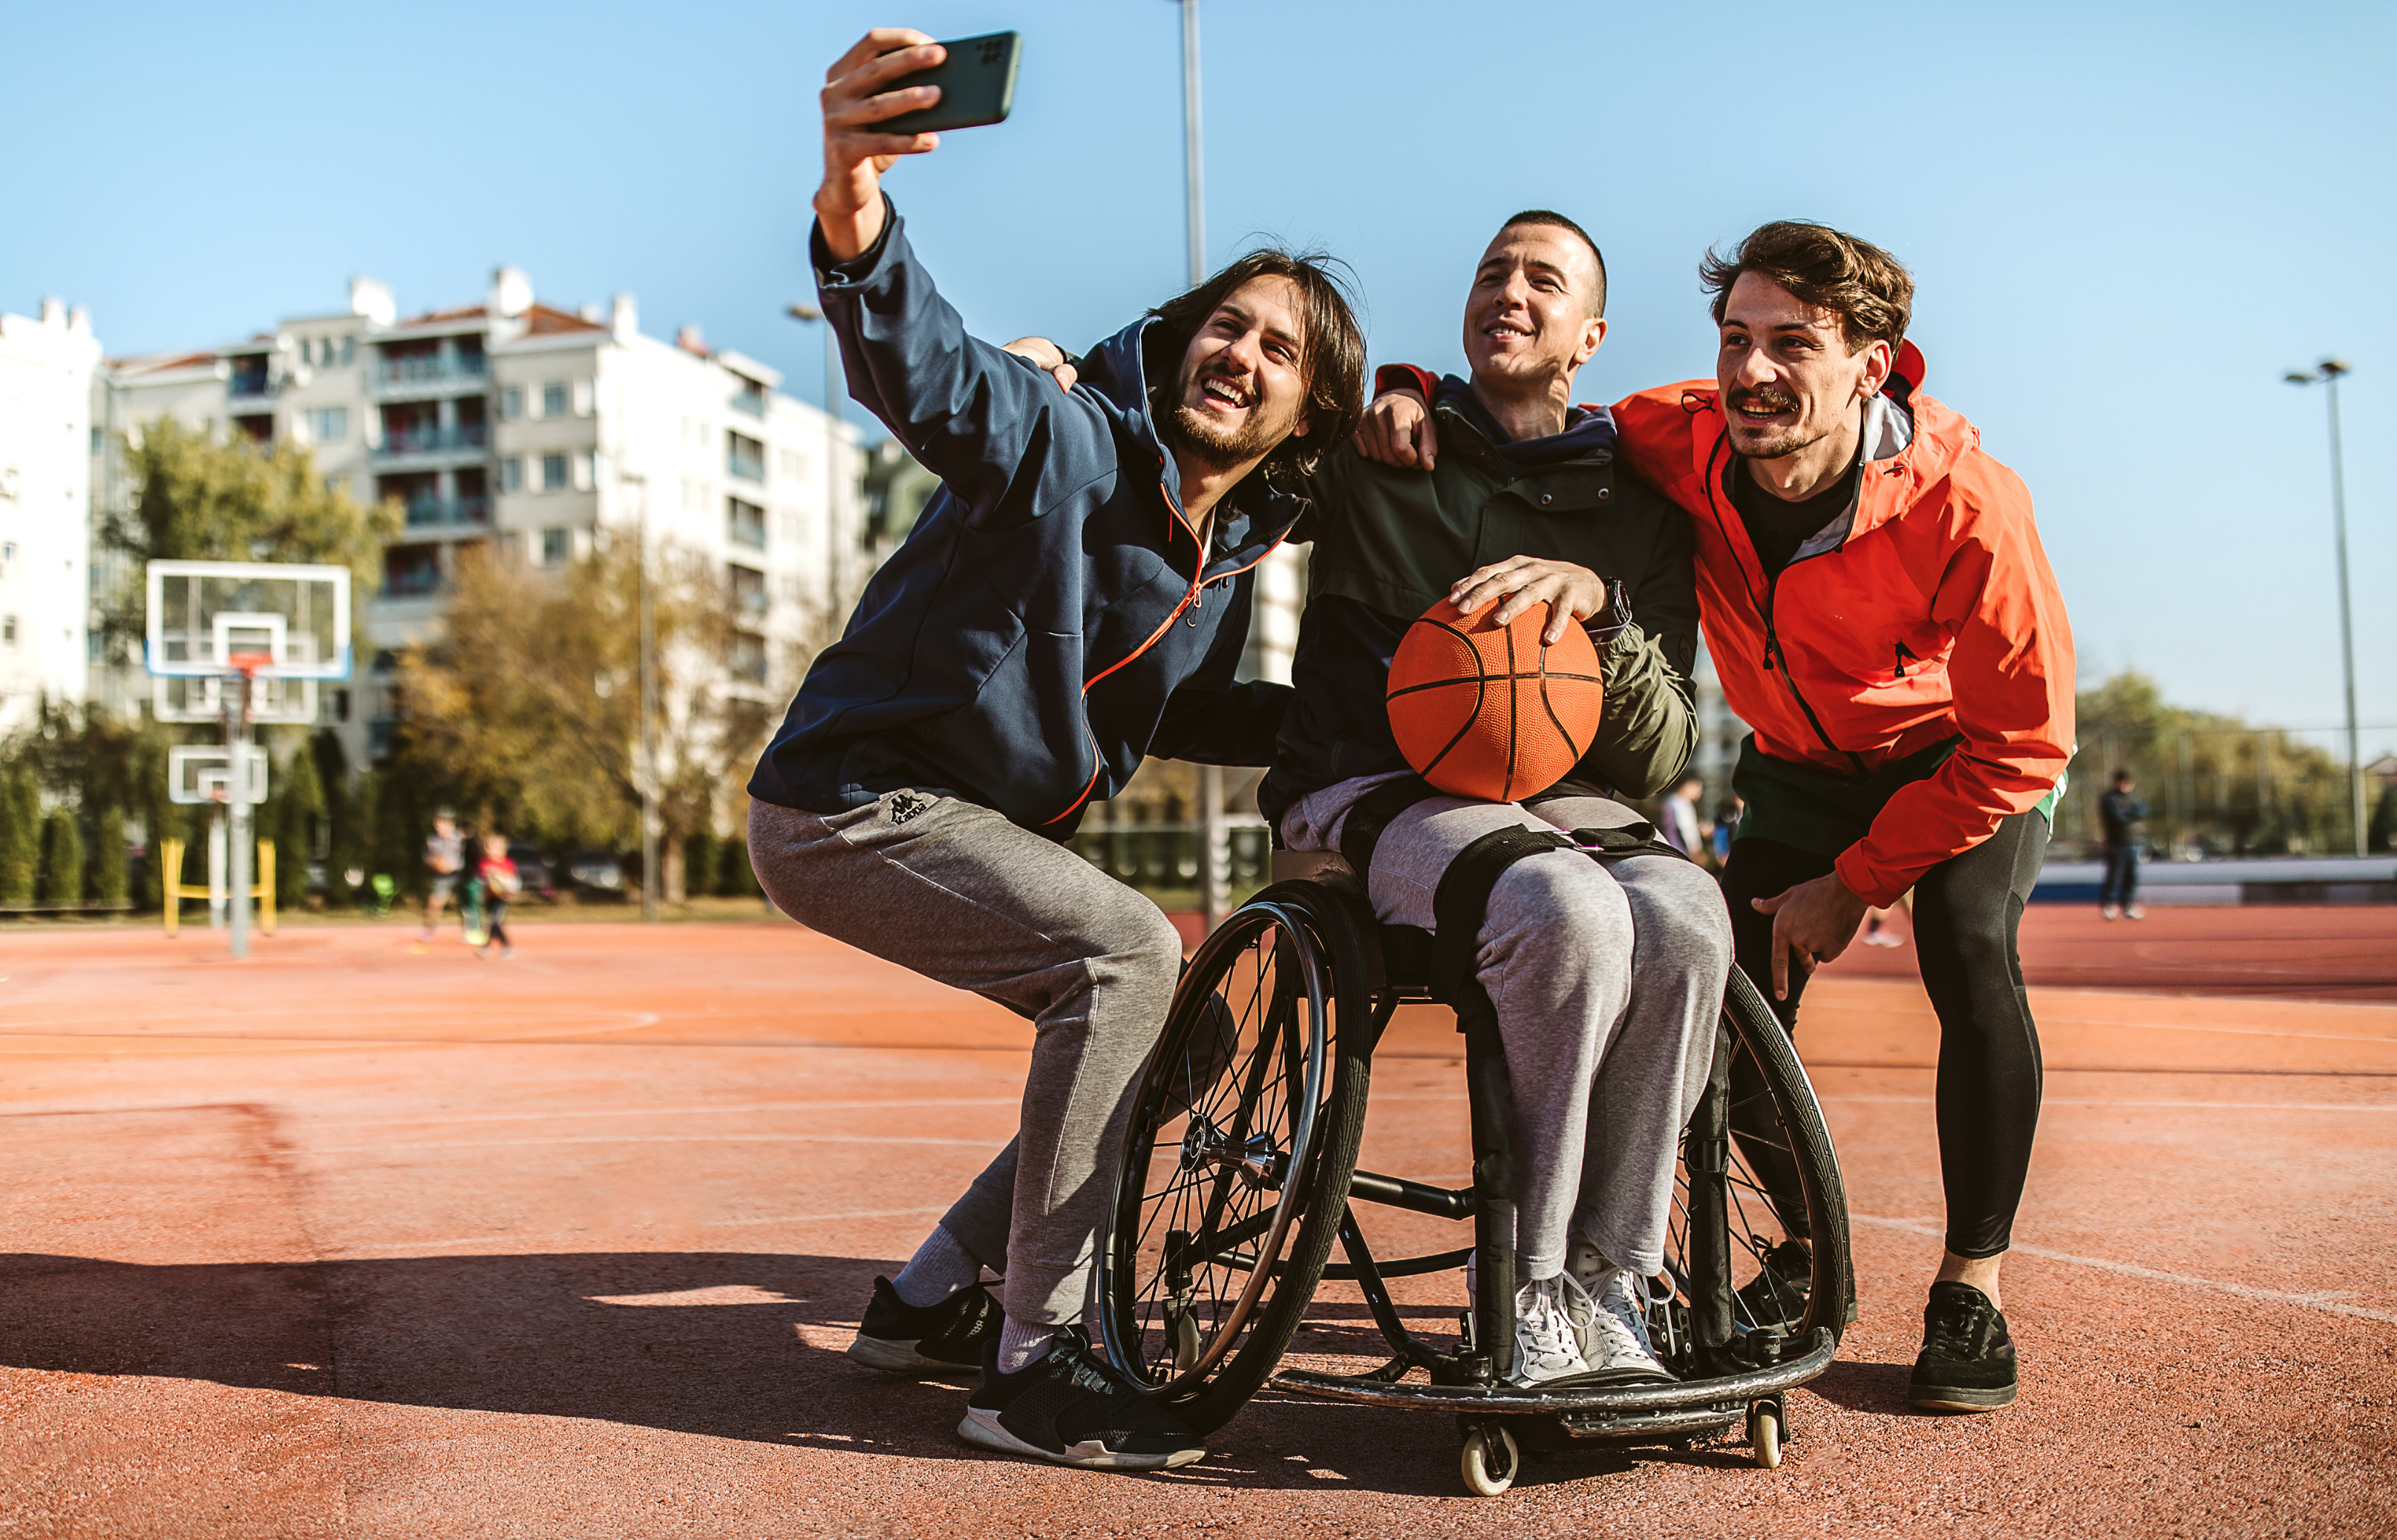 selfie of friends at basketball court, one friend in wheelchair